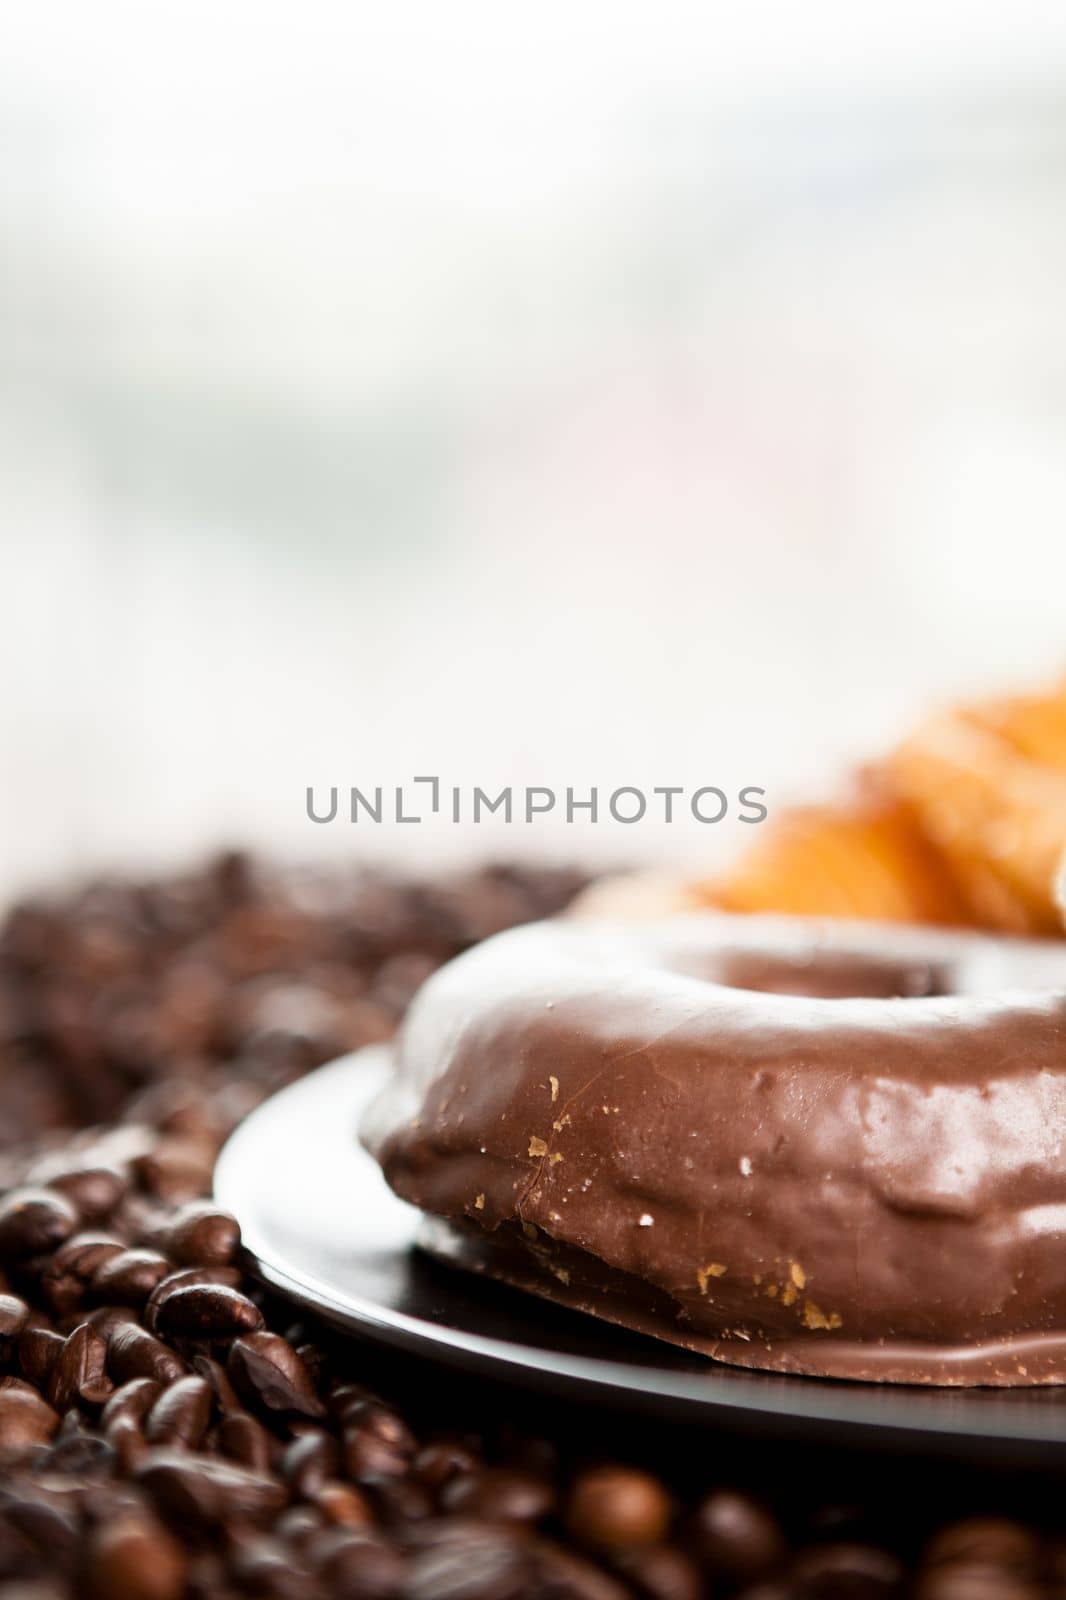 Coffee beans, donut and a cup of coffee in close up photo